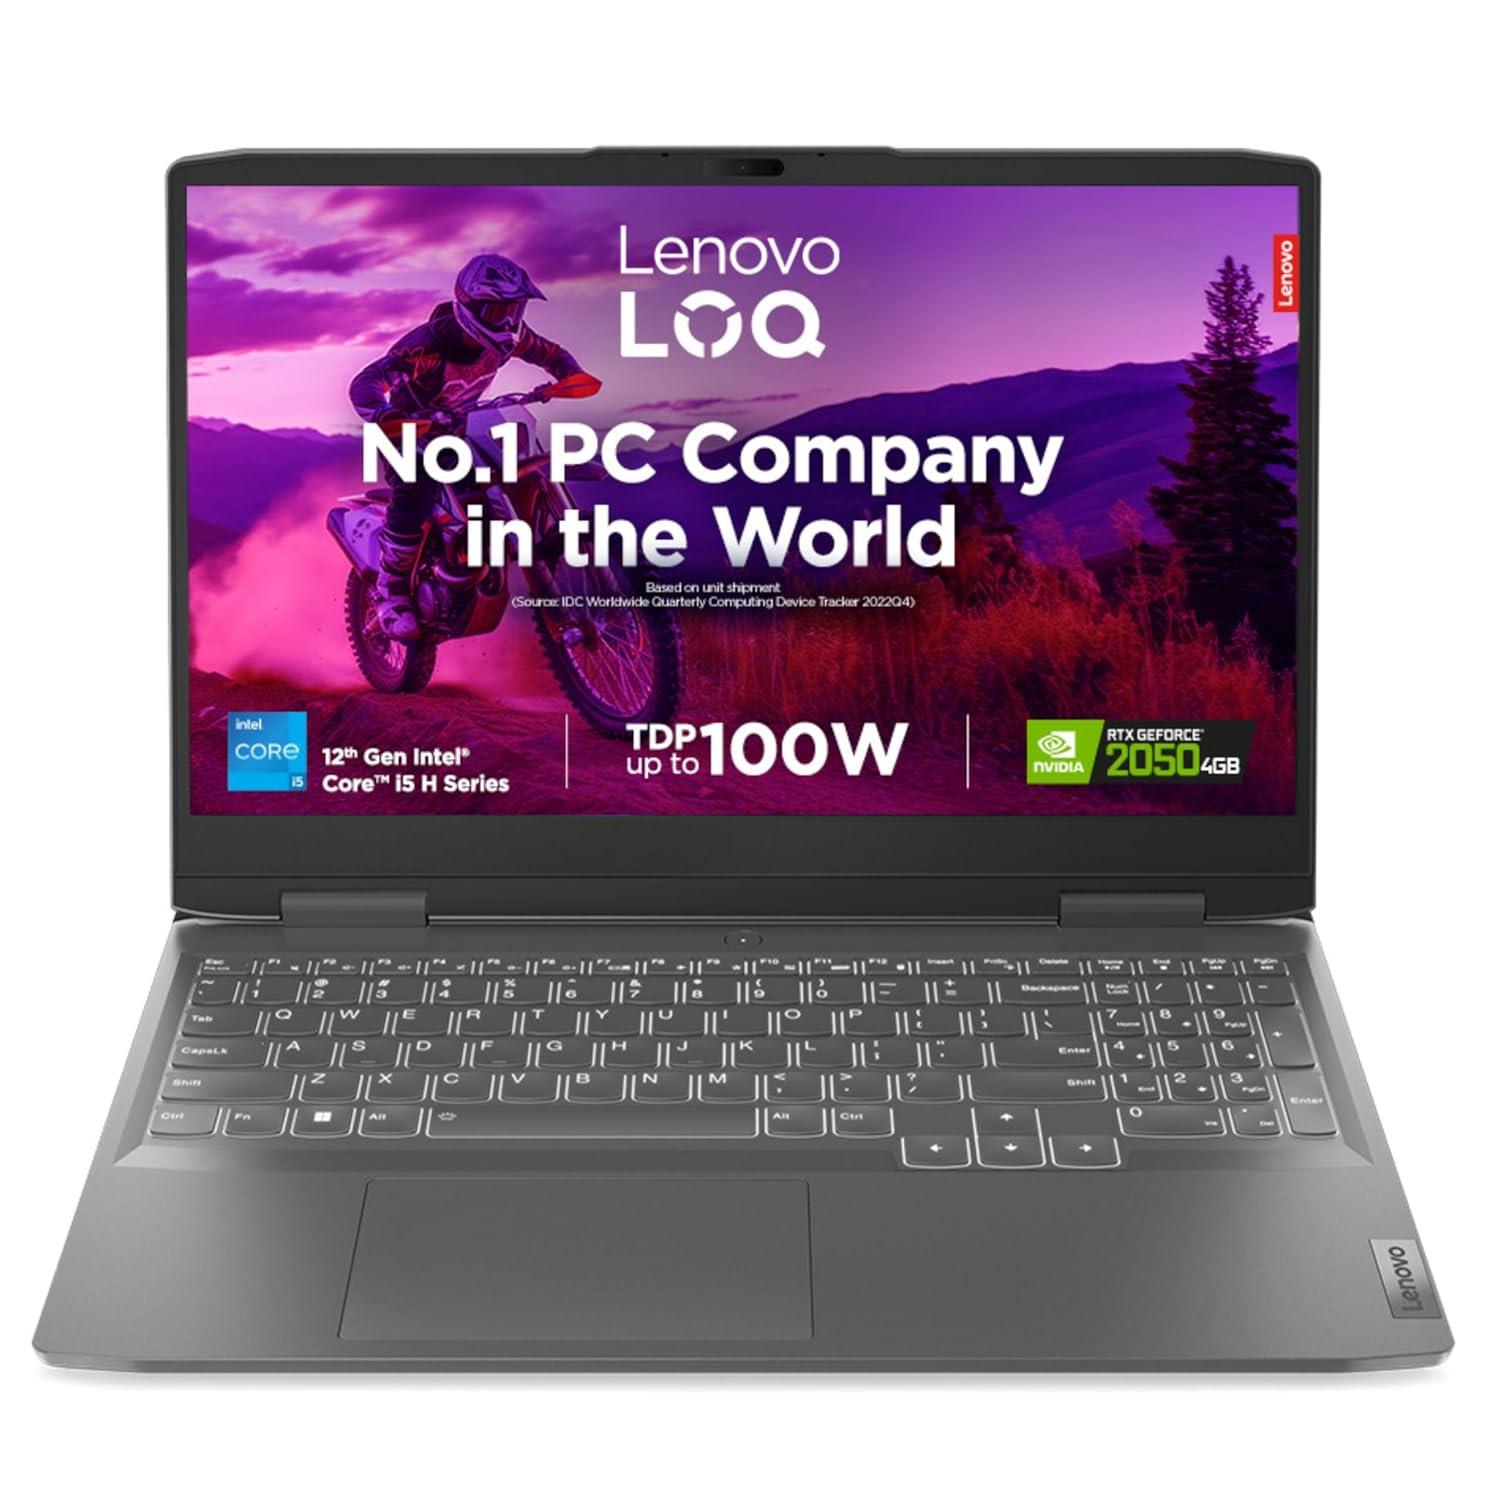 Lenovo LOQ Intel Core I5-12450H 15.6" (39.6Cm) FHD IPS 144Hz 350Nits Gaming Laptop (16GB/512GB SSD/Win 11/NVIDIA RTX 2050 4GB Graphics/Office 2021/3 Month Game Pass/Storm Grey/2.4Kg), 82XV00F4IN